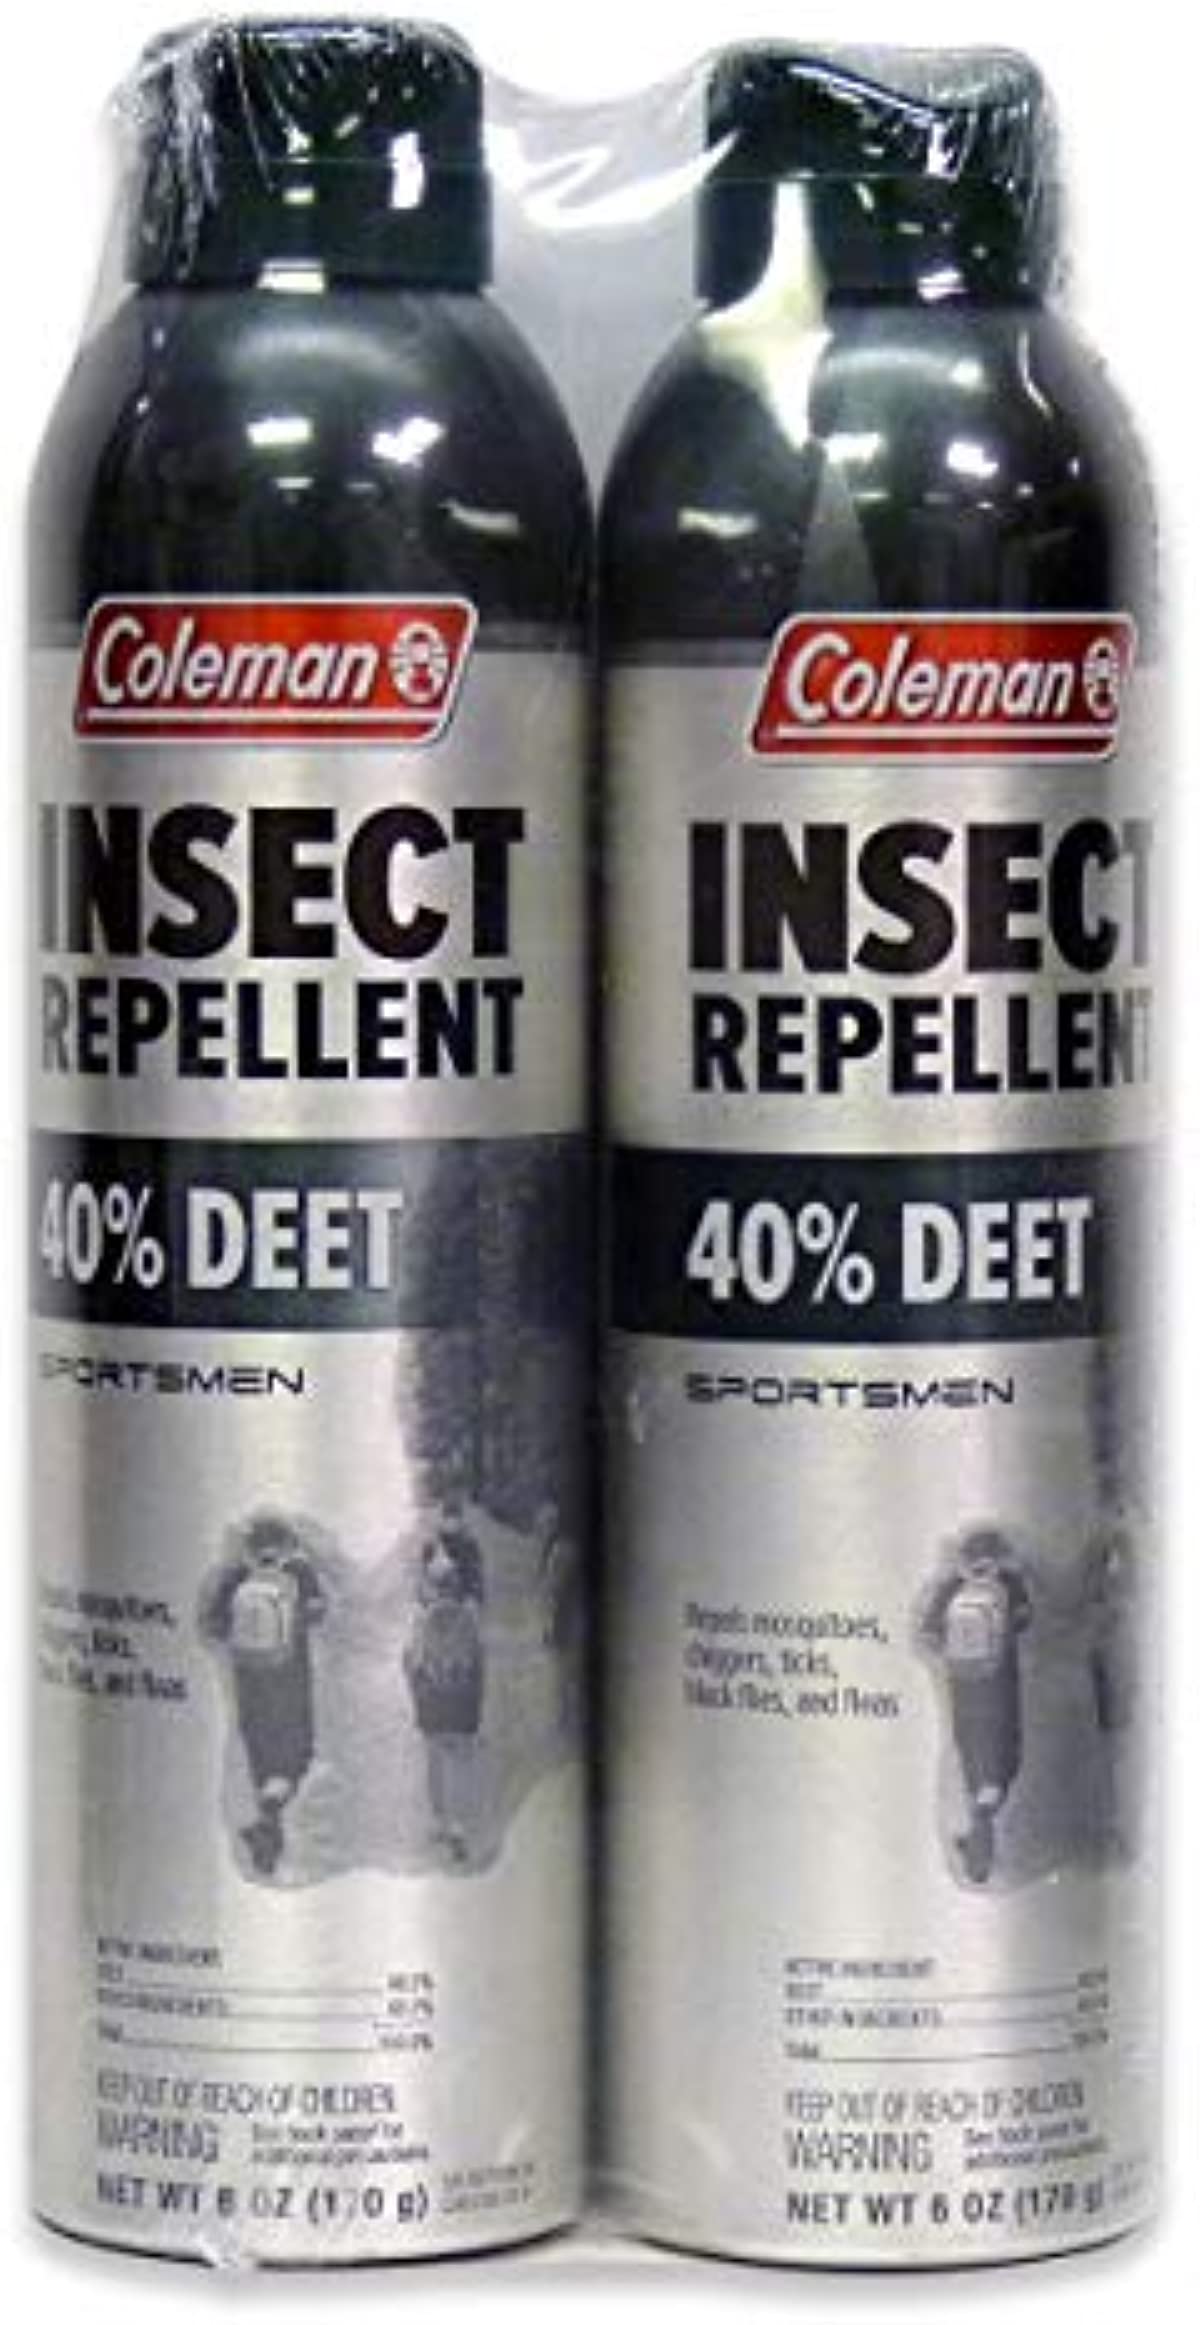 Coleman 40{6067cc7a7f0213604a8ddef873e1d69e0fe59d34ff410378704f95102e17b39f} DEET Bug Repellent Spray Insect Repellent Spray - 6 oz, 2 Count